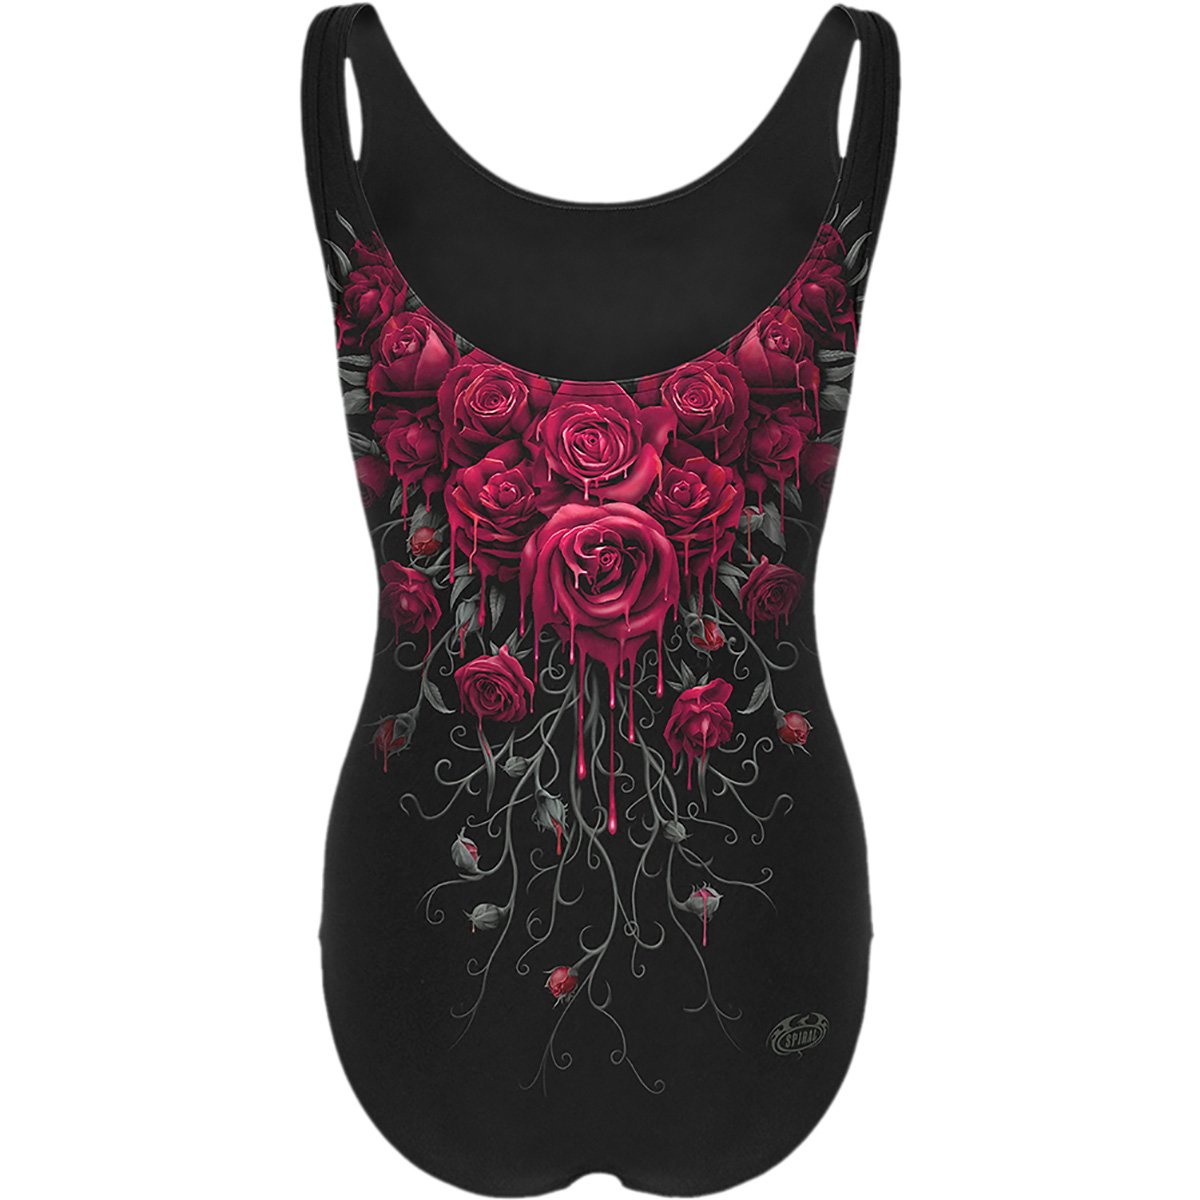 blood rose one piece bathing suit